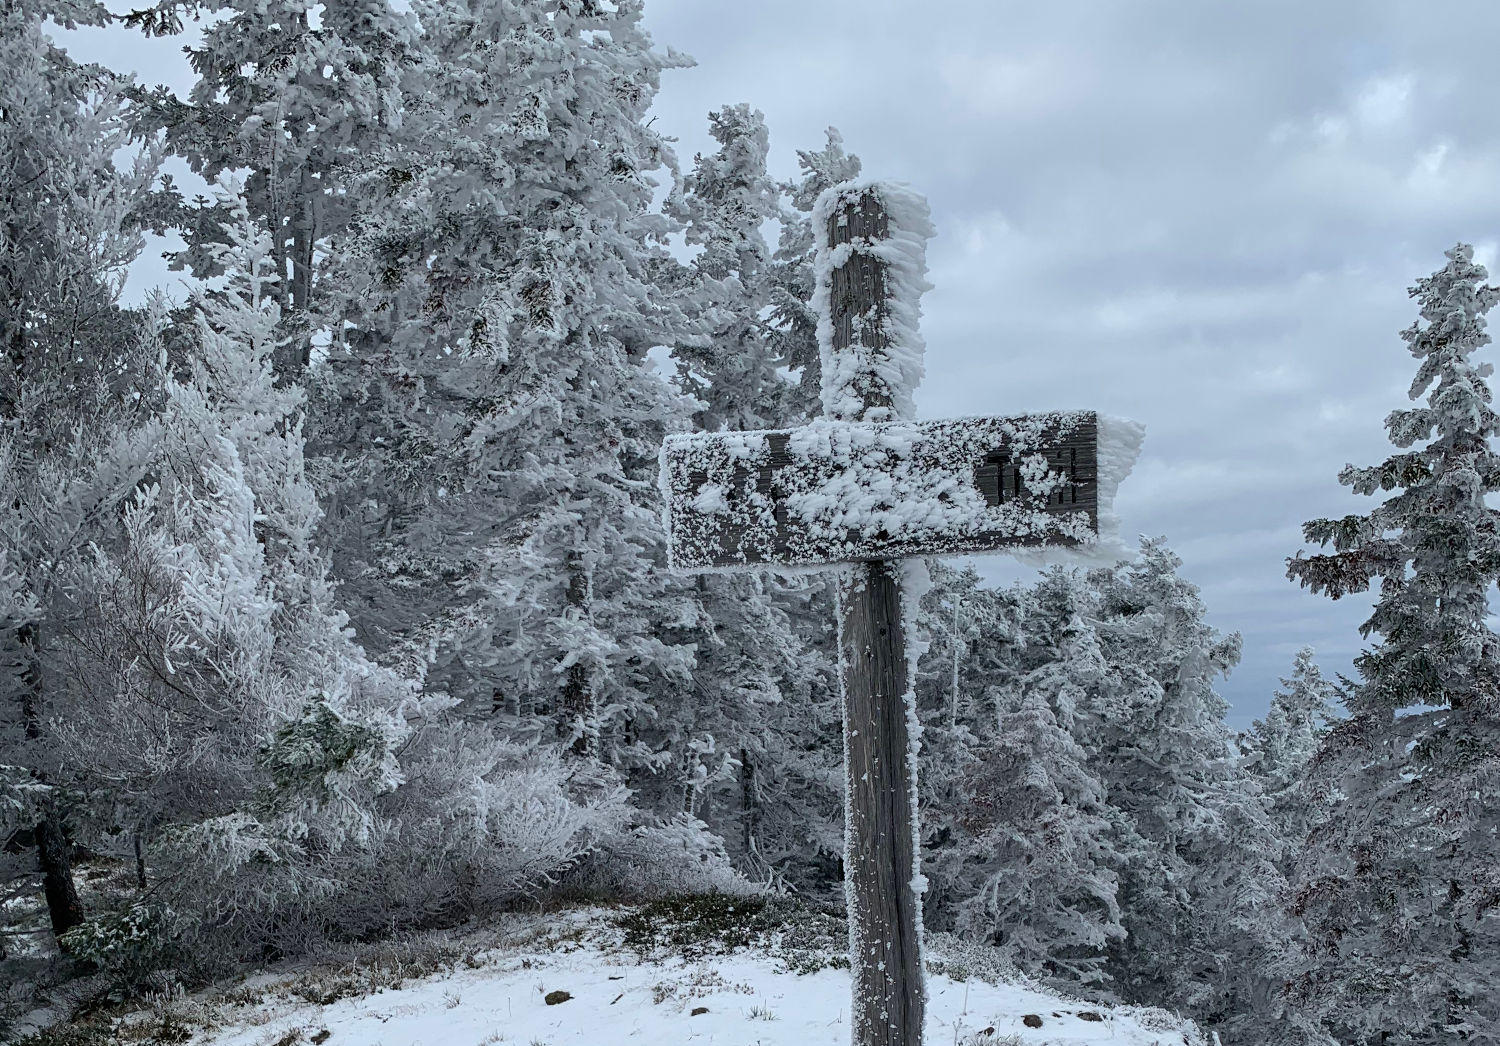 Very frosty trail sign near the summit